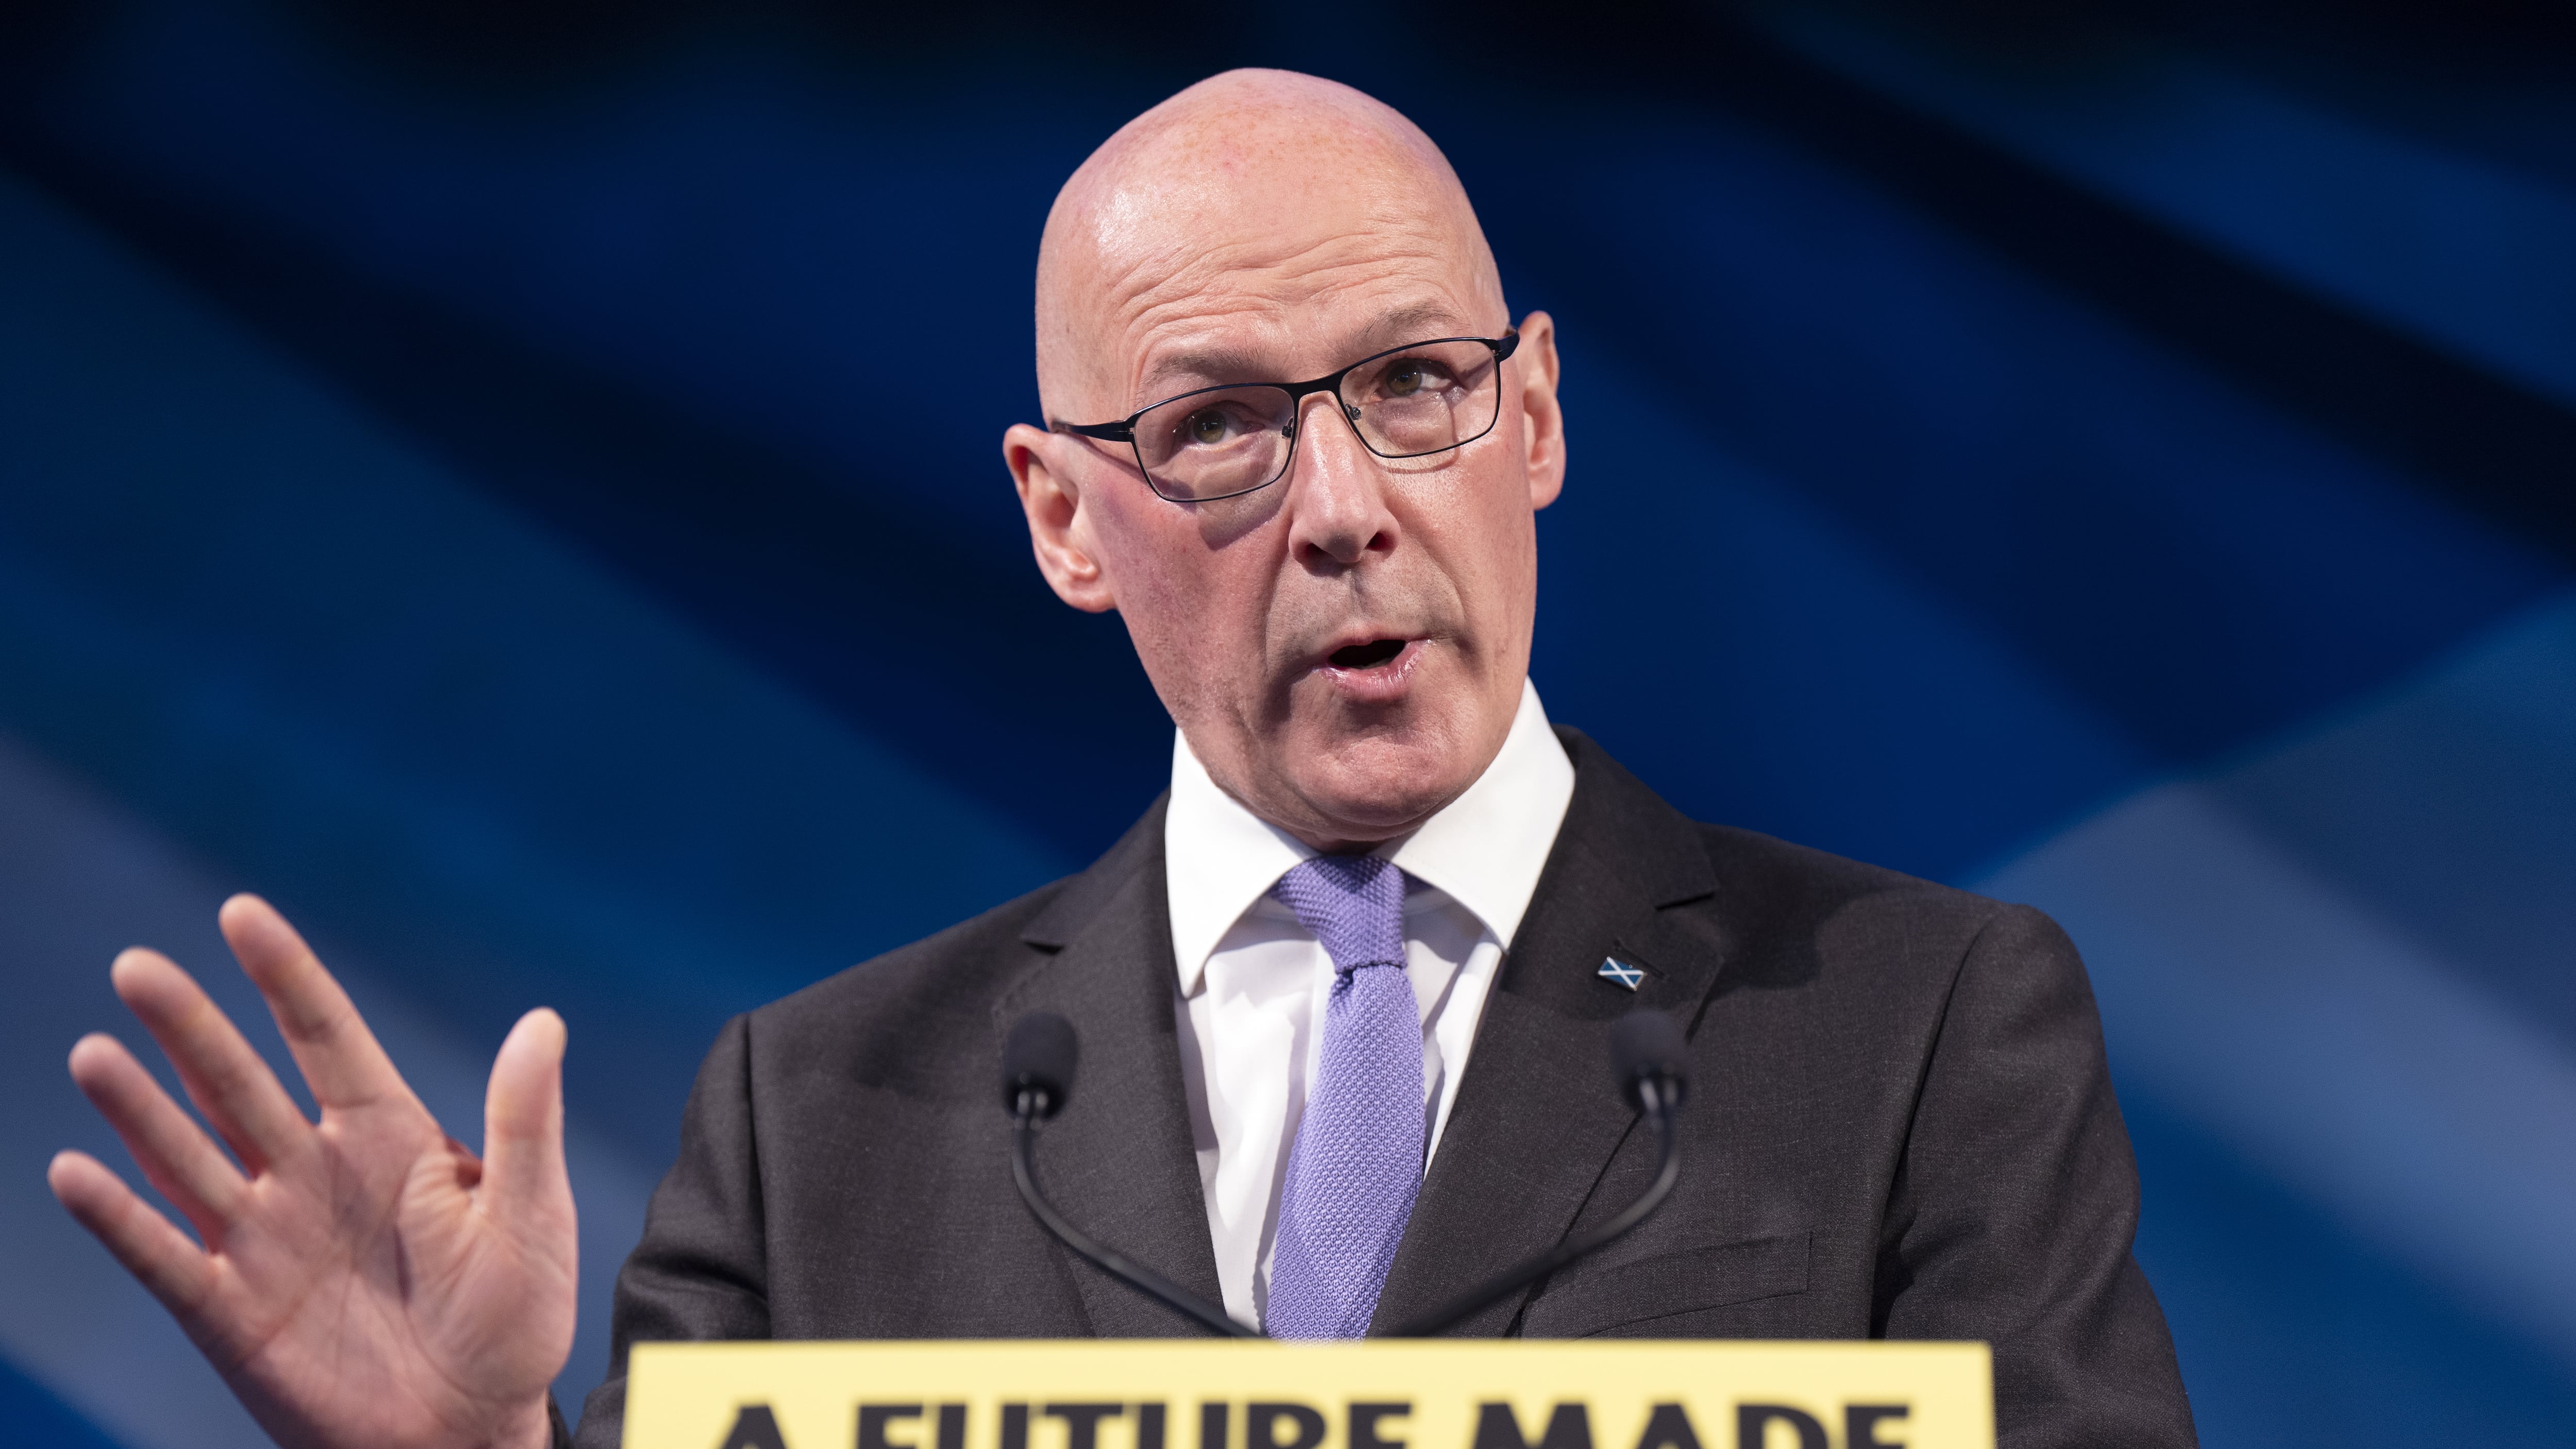 First Minister John Swinney will speak about Brexit during a campaign stop in Aberdeen on Monday